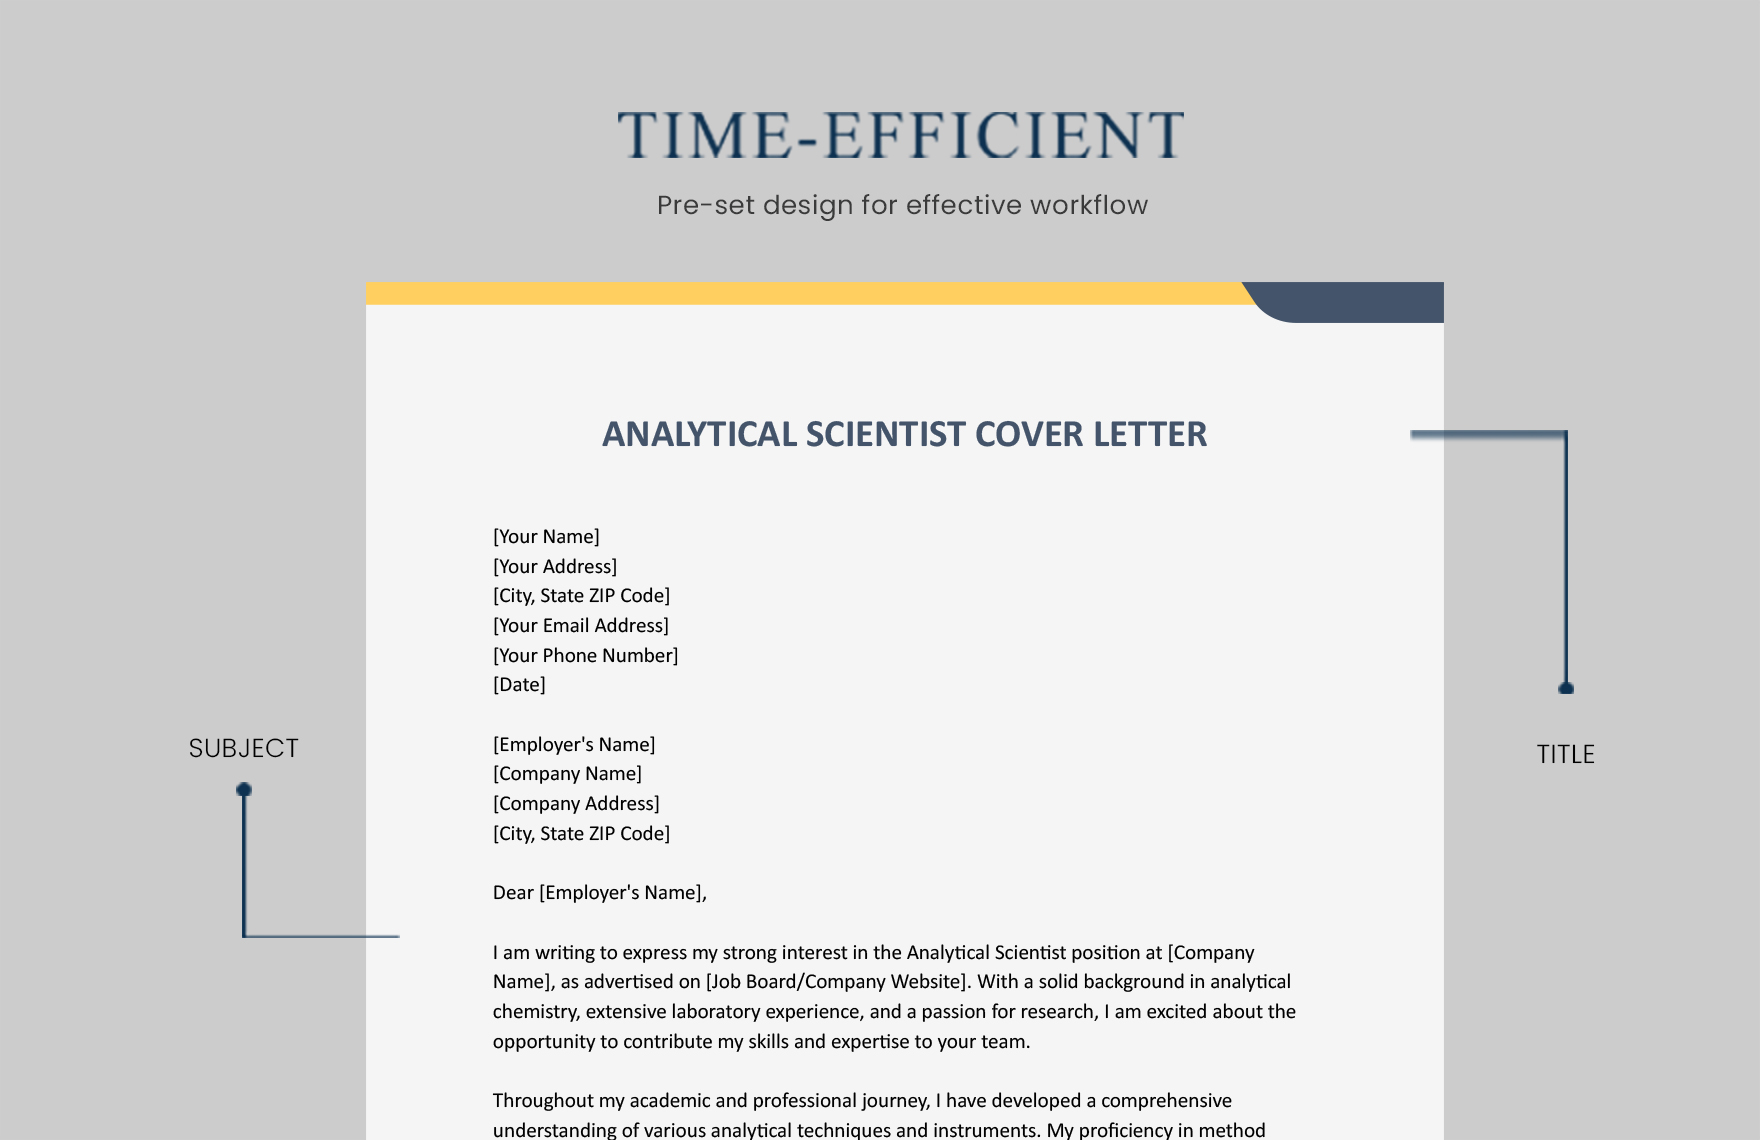 Analytical Scientist Cover Letter